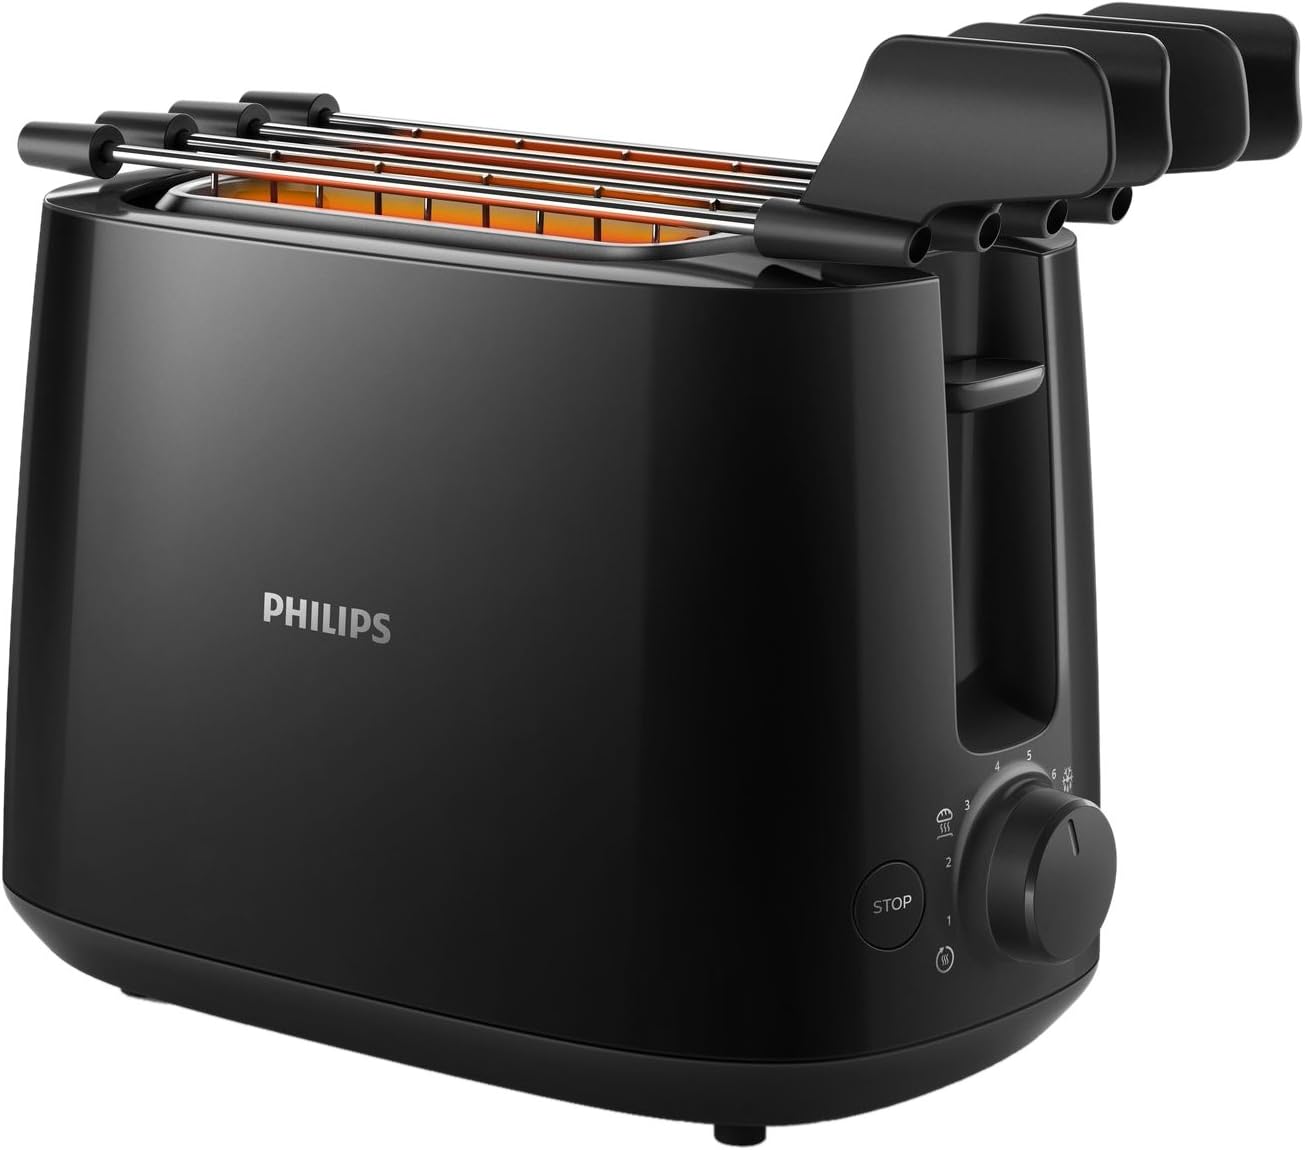 Philips Daily Collection HD2583/90 8SLICE (S) 600 W Black (8 Slice Toaster - (S), Black, Plastic, button, rotation, China, 600 W)